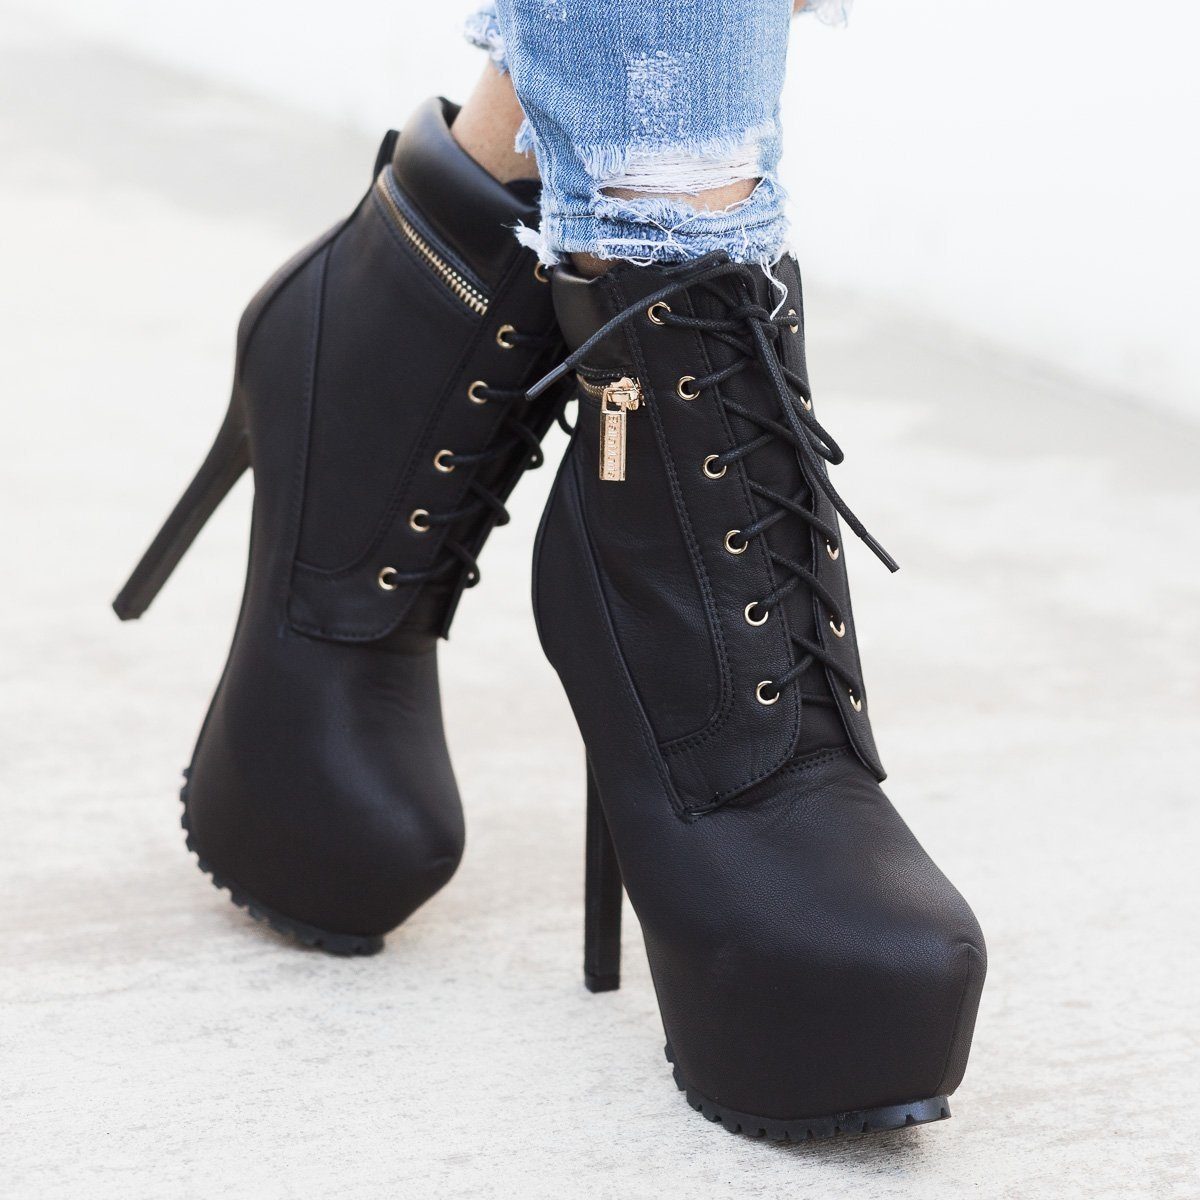 Edgy Lace-Up Platform Ankle Boots Bella 